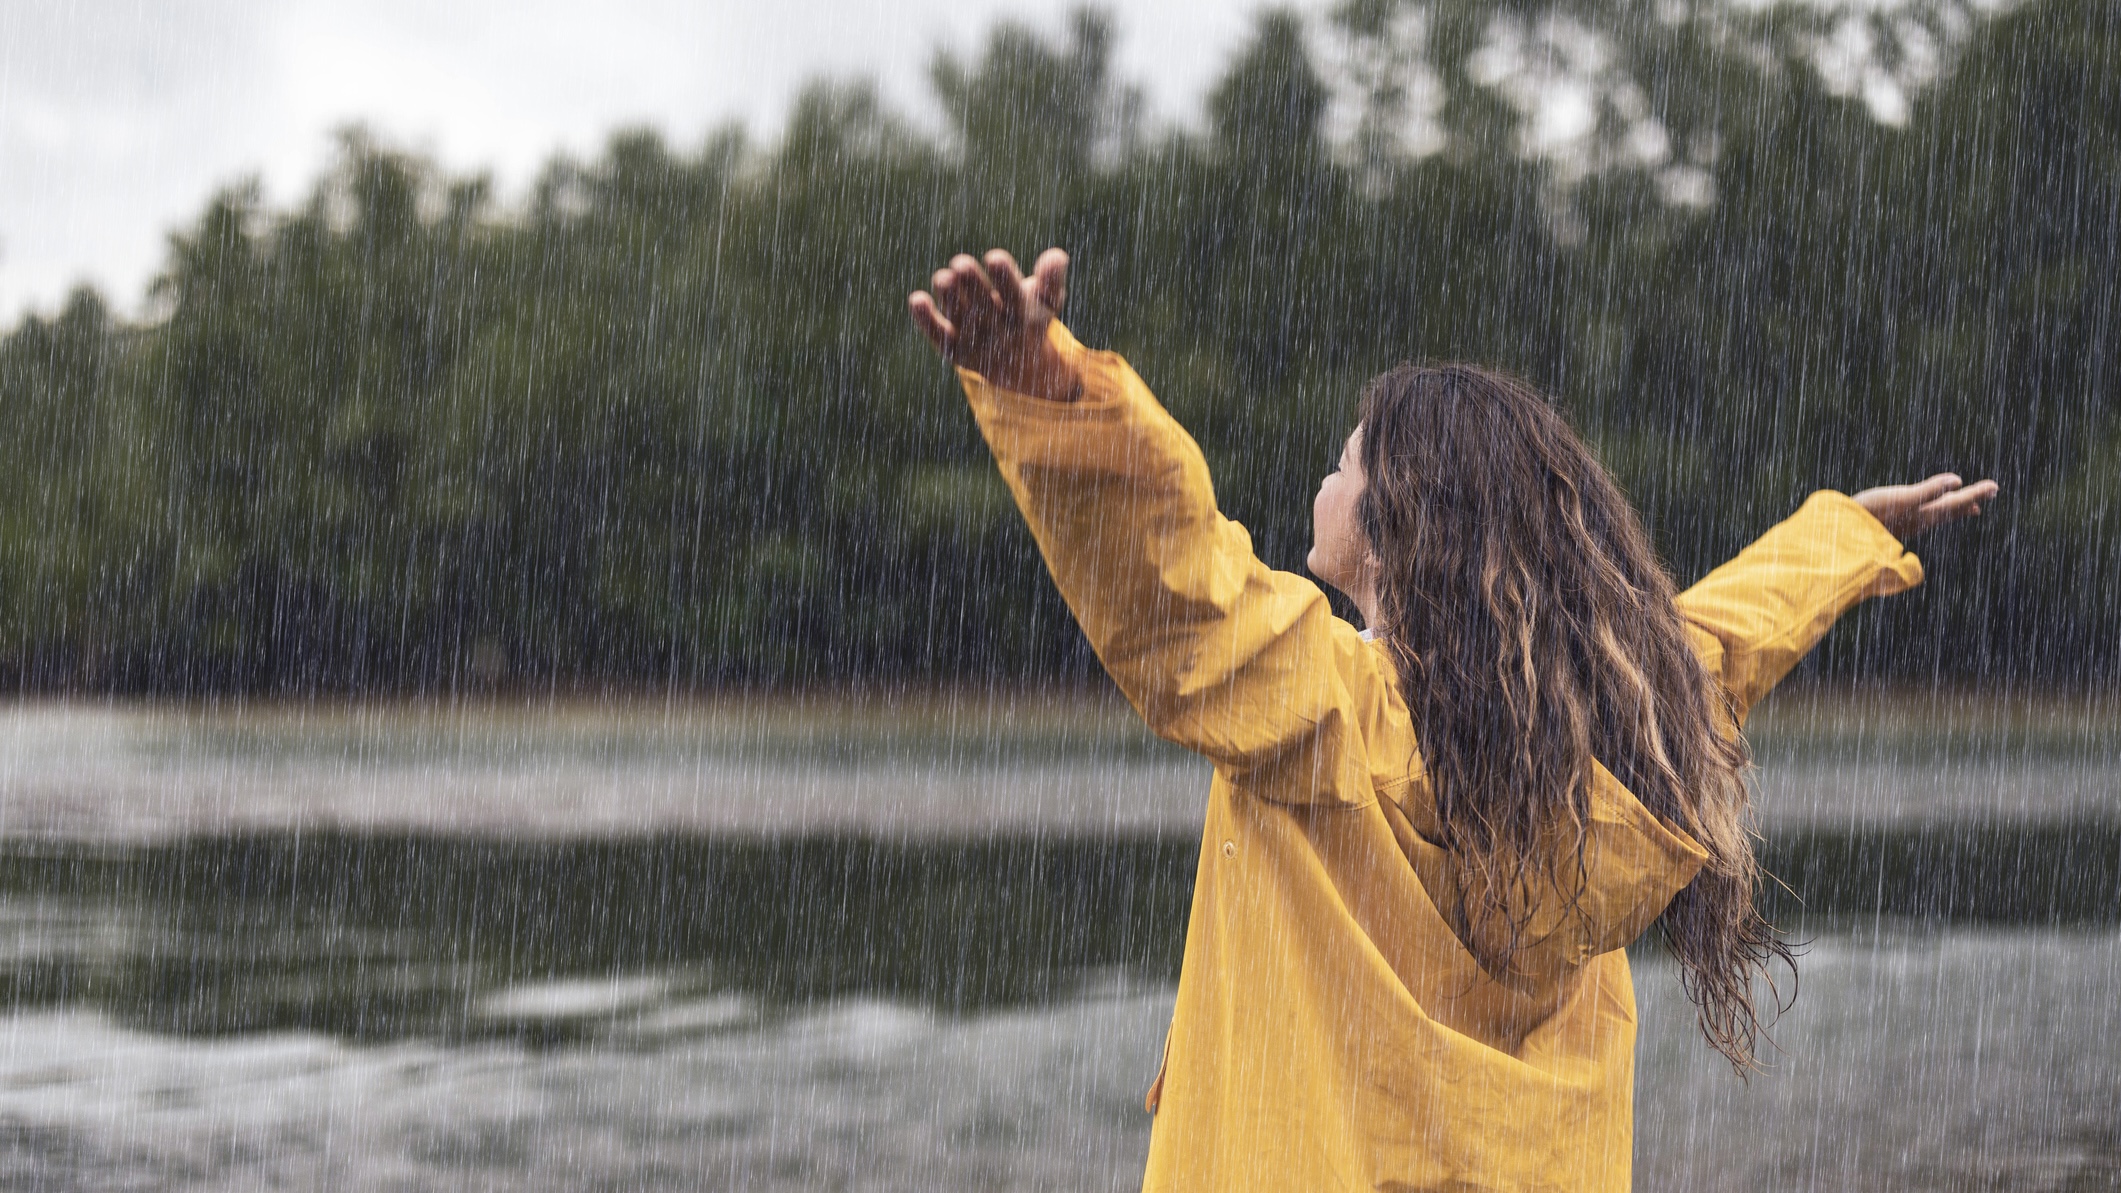 Rear view of carefree woman standing in nature with her arms outstretched during rainy day.